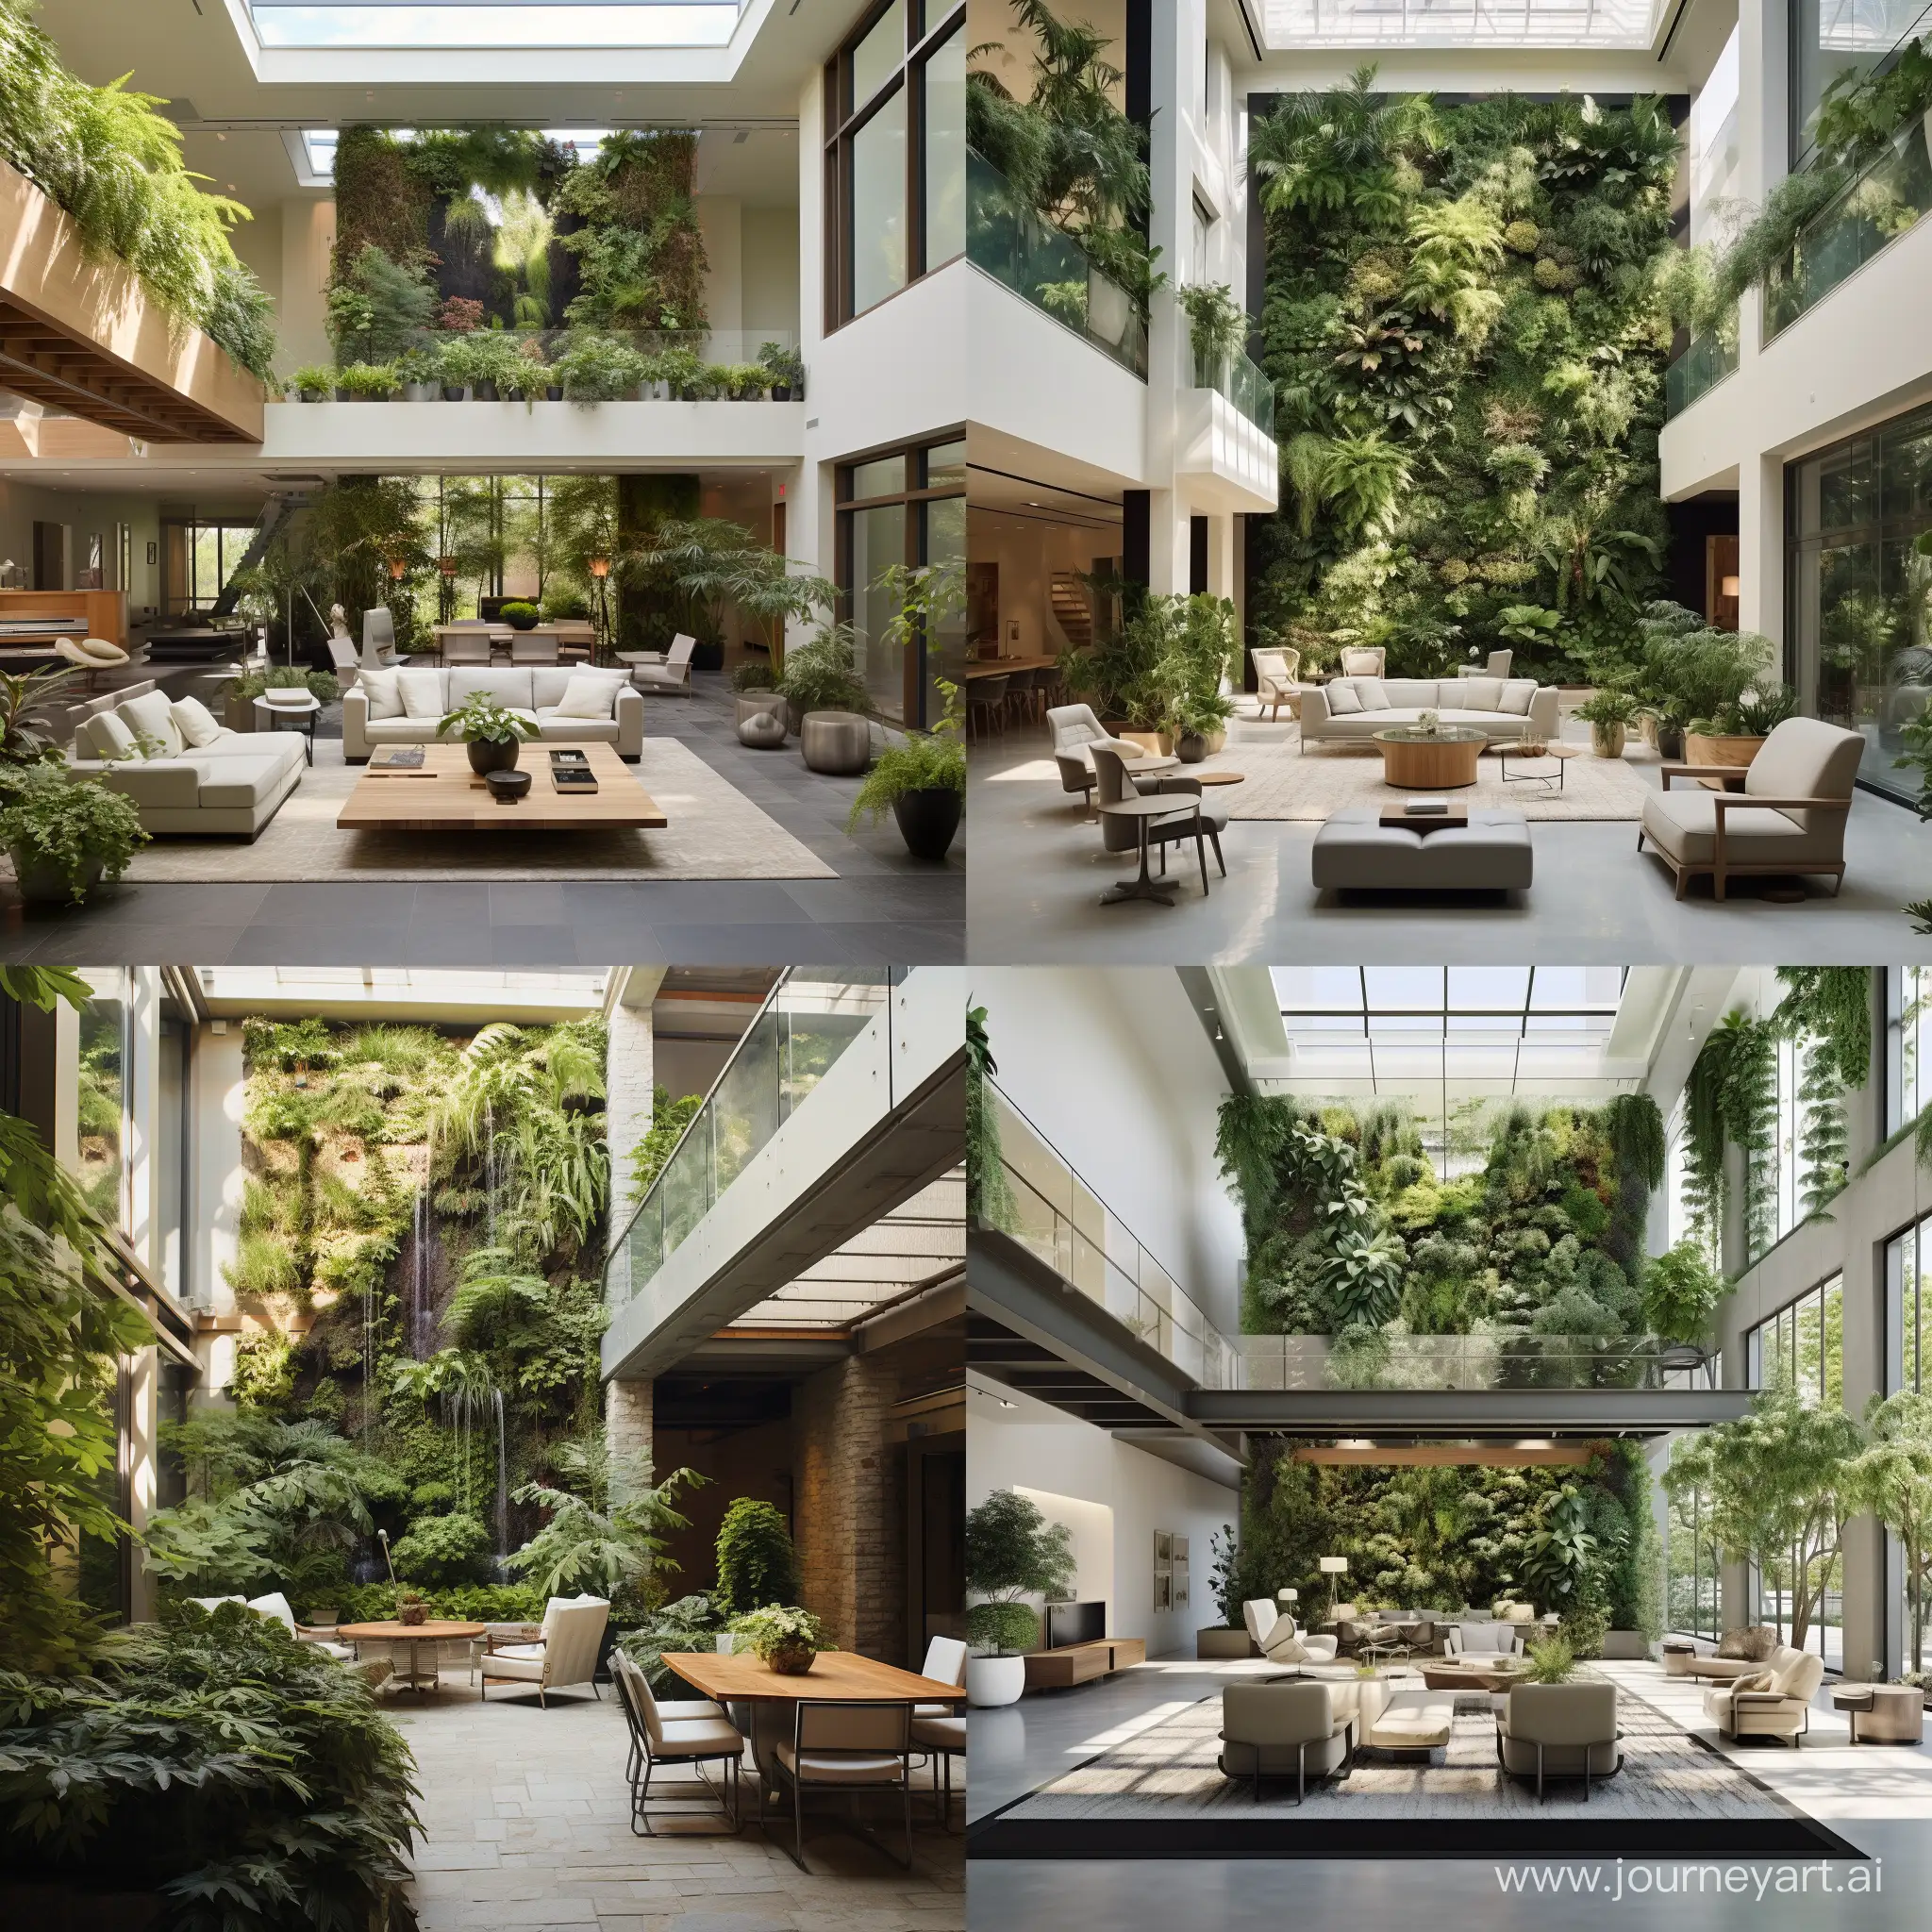 atrium in a rectangular small building of four floor- Emphasize vertical gardens on the walls surrounding the atrium, creating a seamless transition from the floors to the greenery-filled central space.
Select a diverse range of plant species to add texture, color, and seasonal interest.